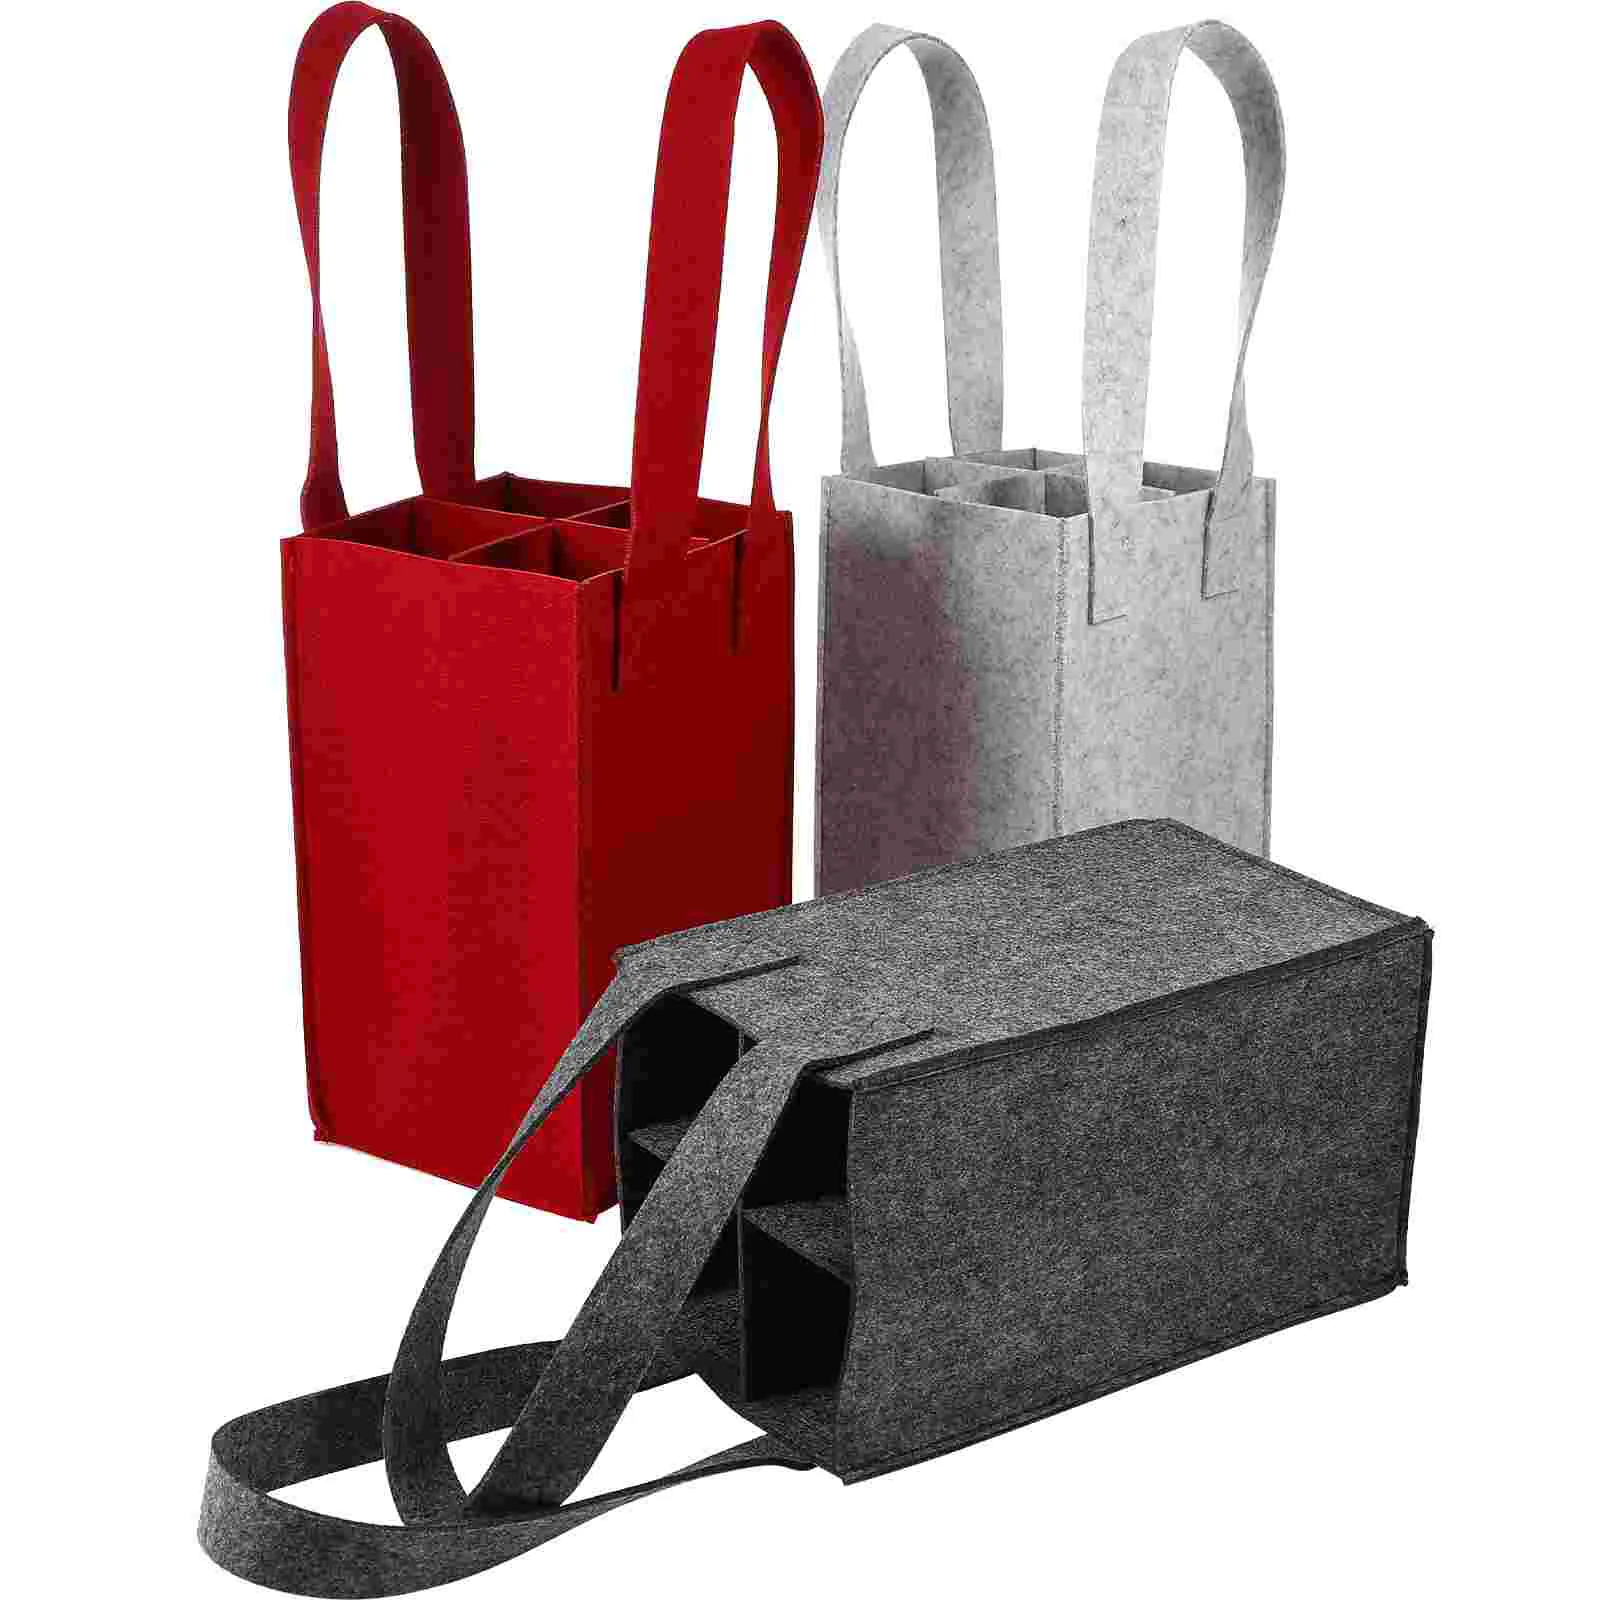 

4Grid Felt Bag Beer Bottle Shopping Tote Red Travel Carry On Bag Wedding Party Camping Bottle Carry Bags